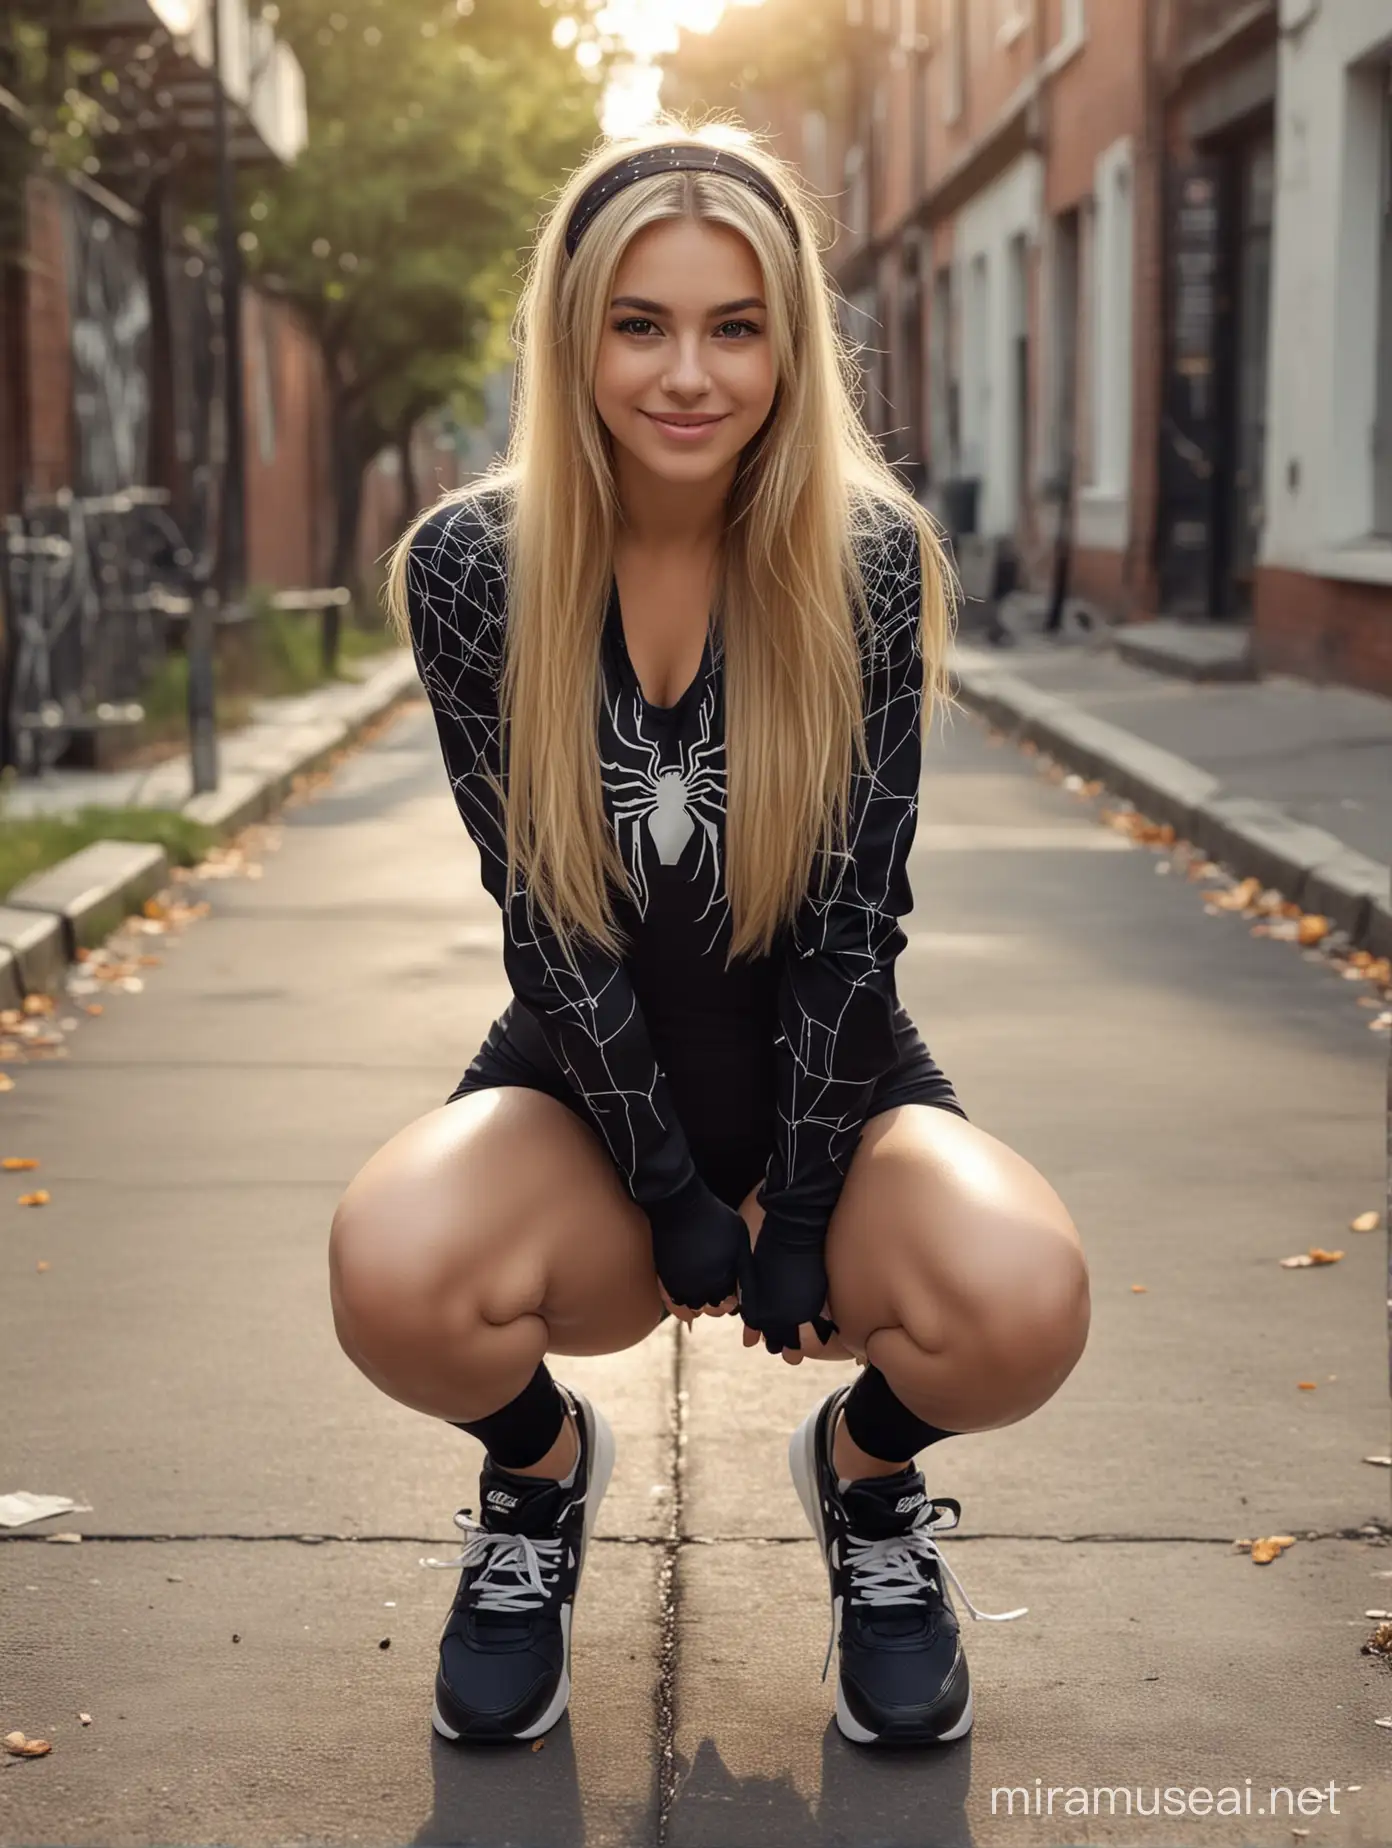 Blonde Girl in Nike Sneakers Smiling Outdoors with Spider Web Bodysuit